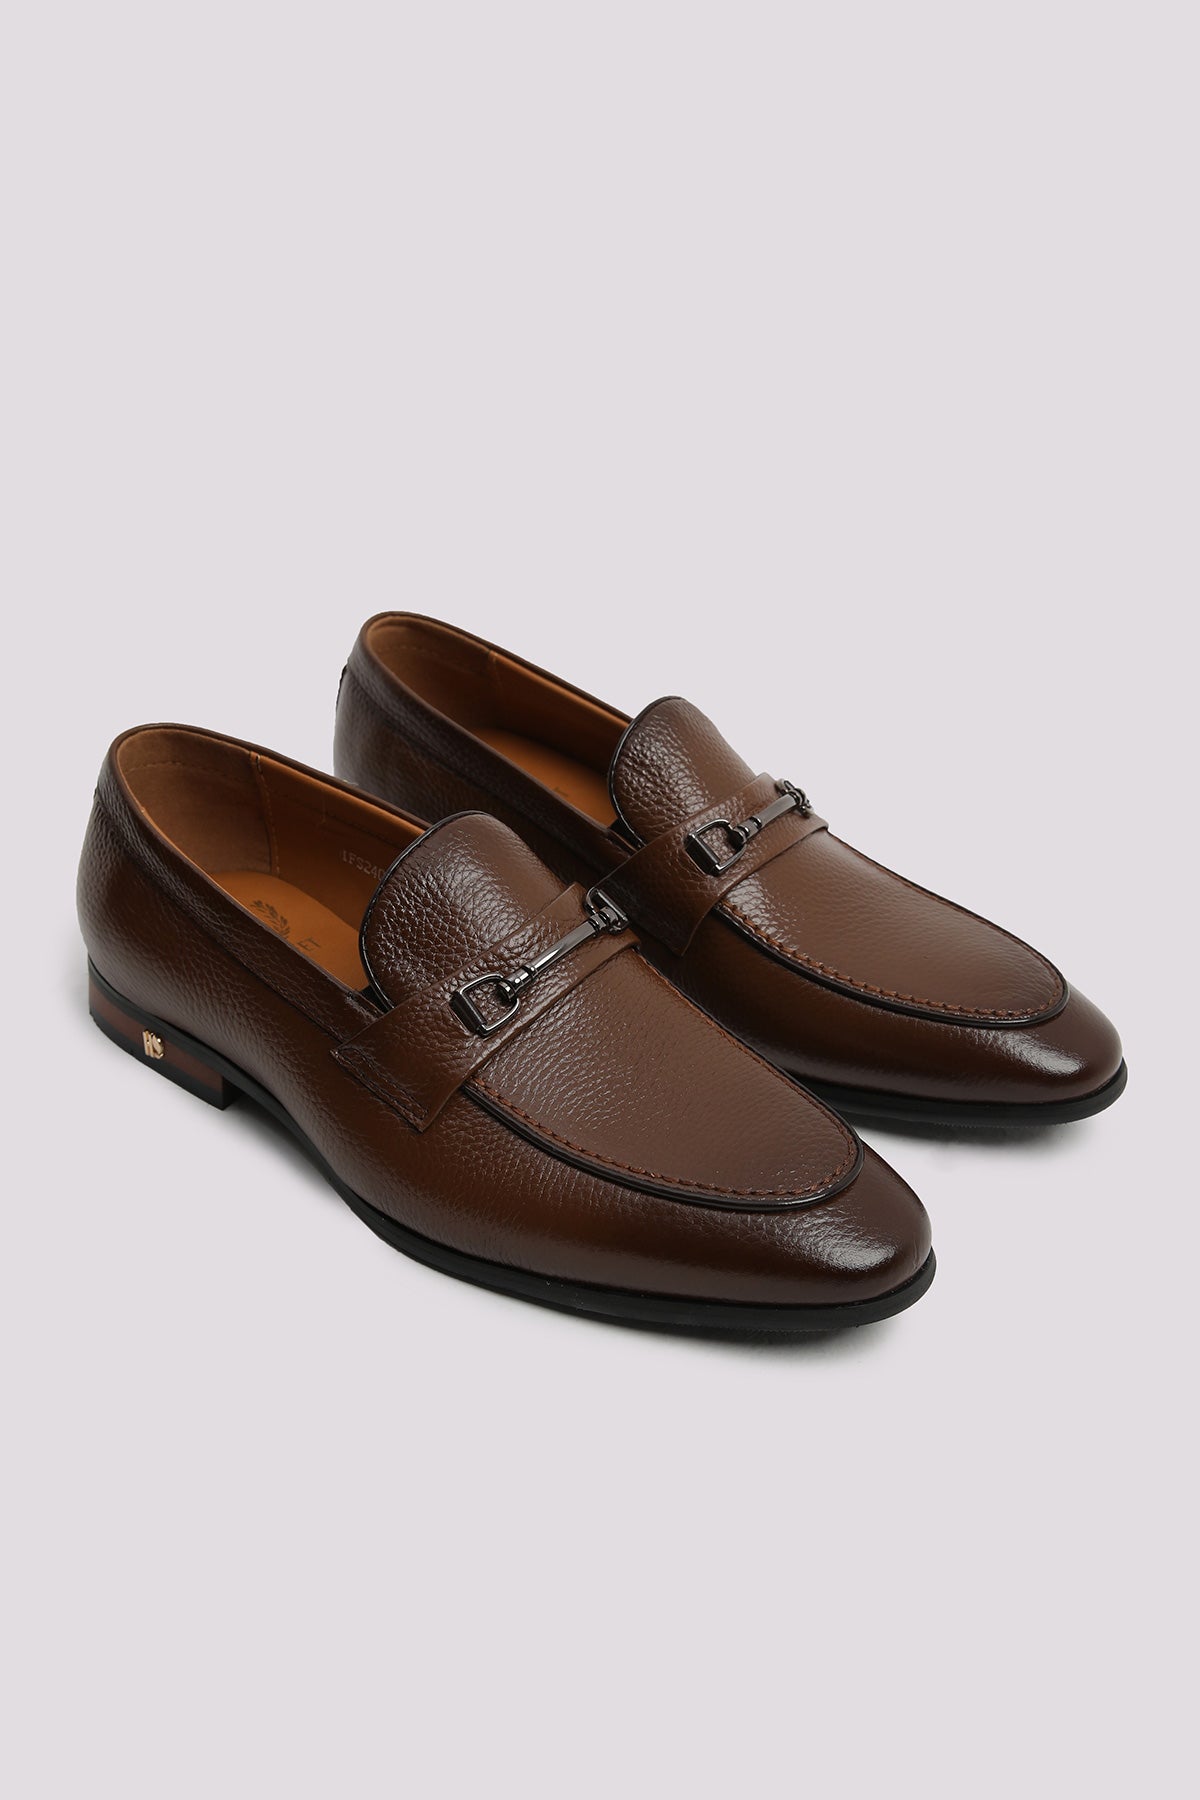 BROWN CLASSIC LOAFER SHOES